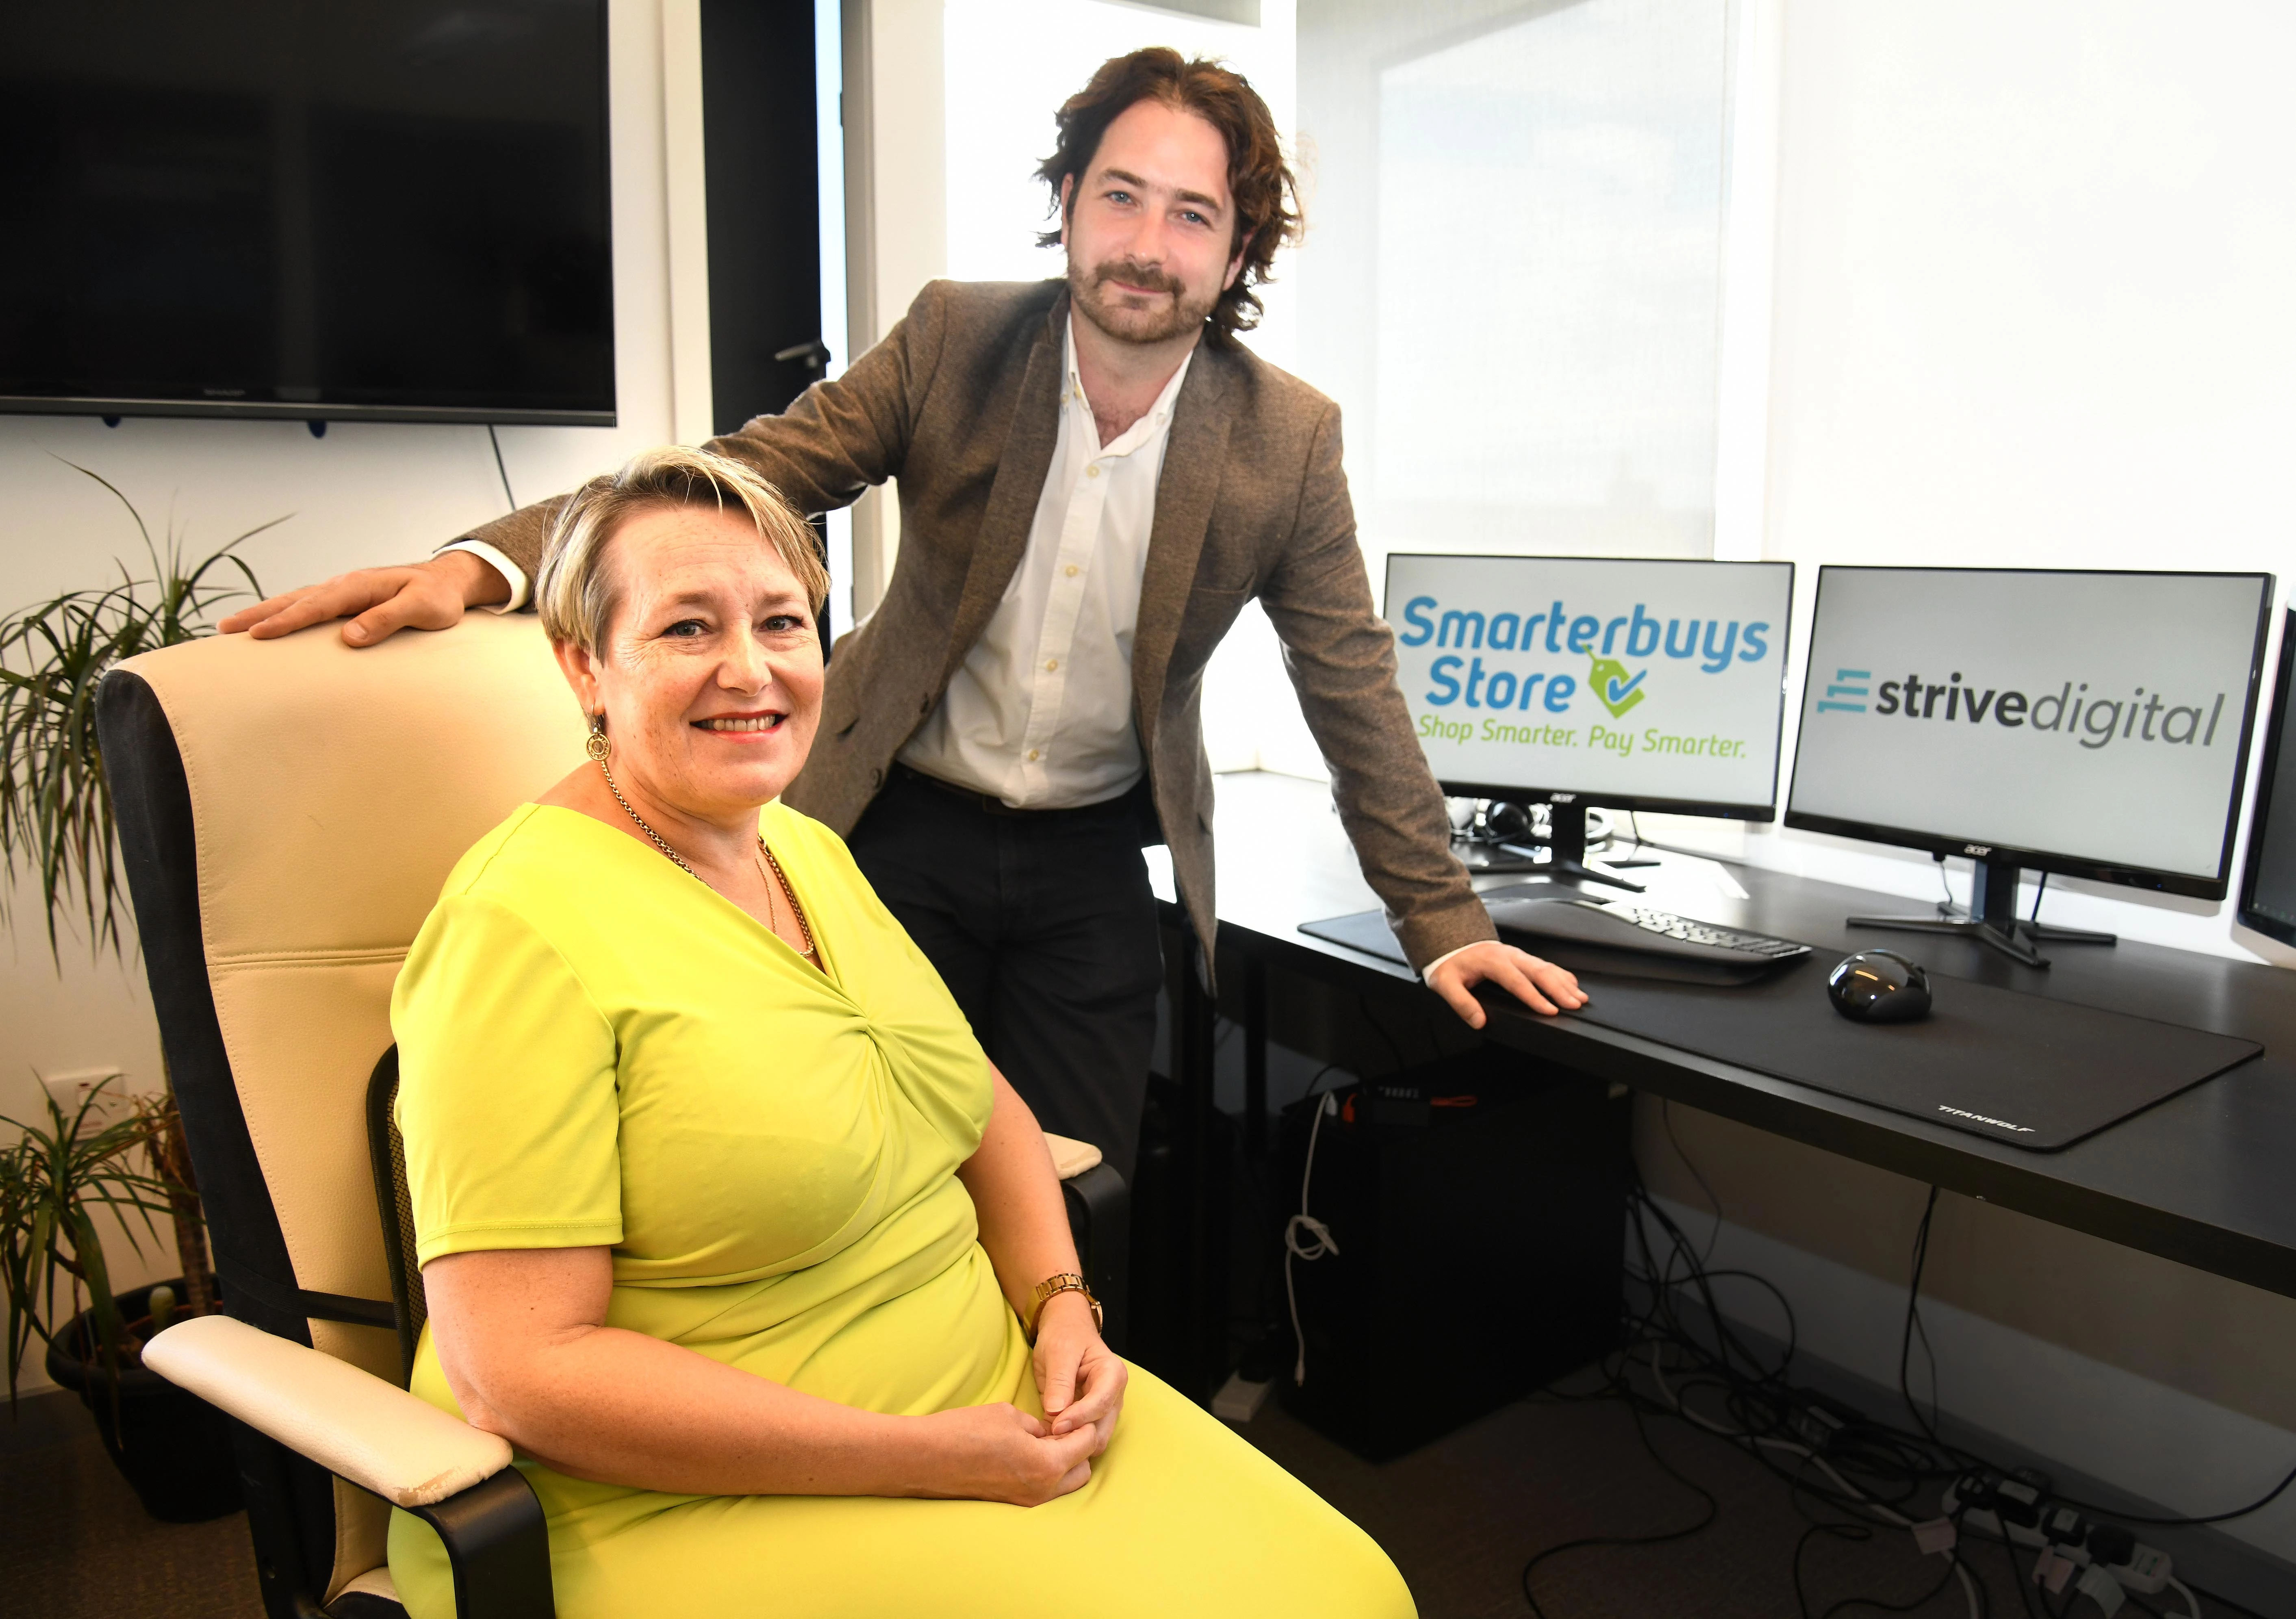 Smarterbuys Store chief executive Vicky McCourt with MD of Strive Digital Steven Walker